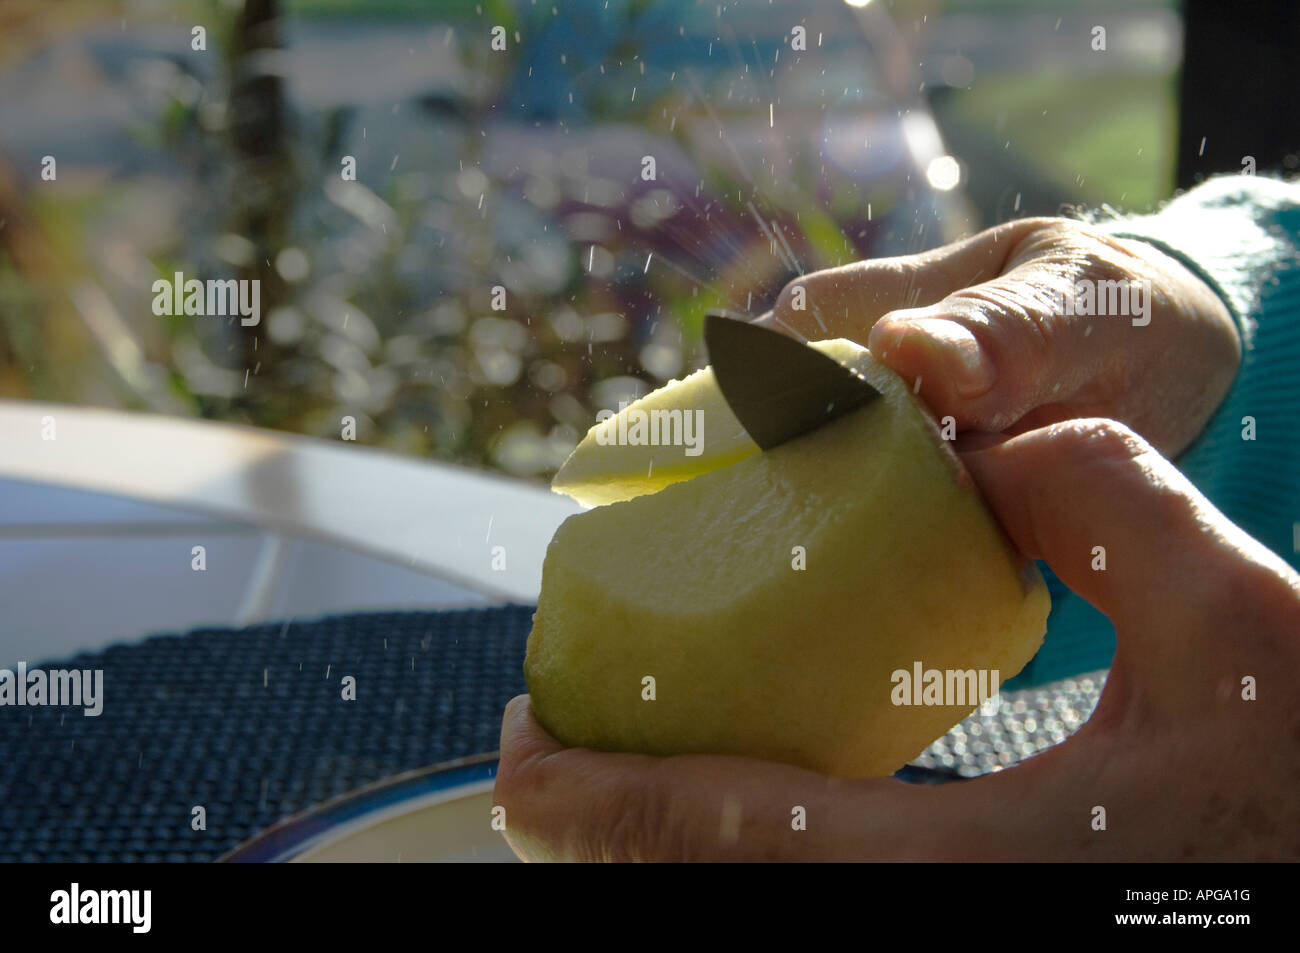 Splashing juices as an apple is being cut Stock Photo